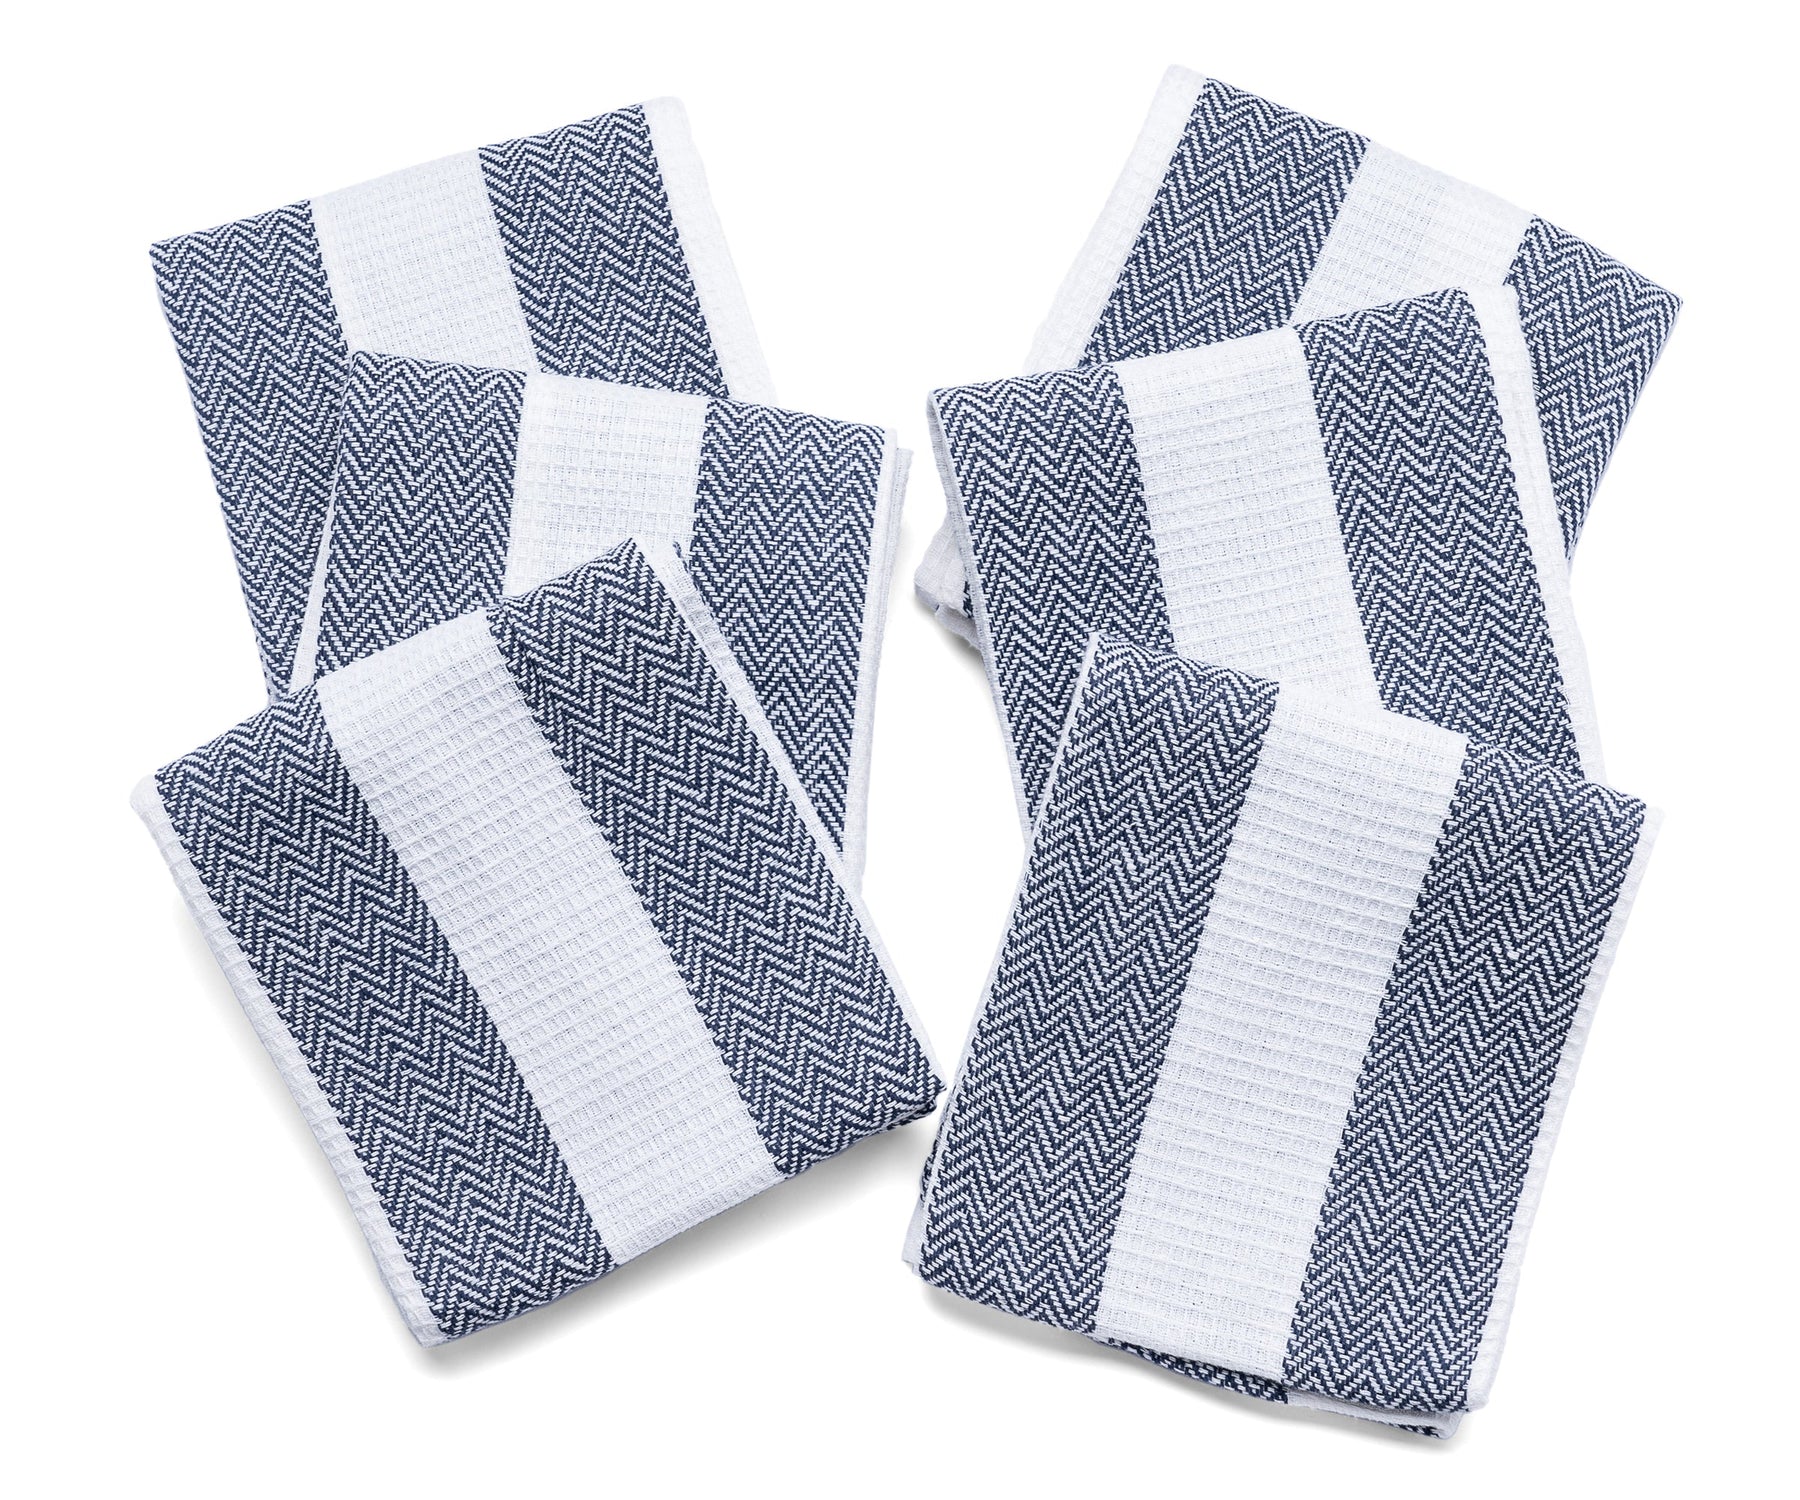 Dish towels, Christmas kitchen towels, Kitchen dish towels sets, Blue and white striped towels, Stonewall kitchen tea towels.